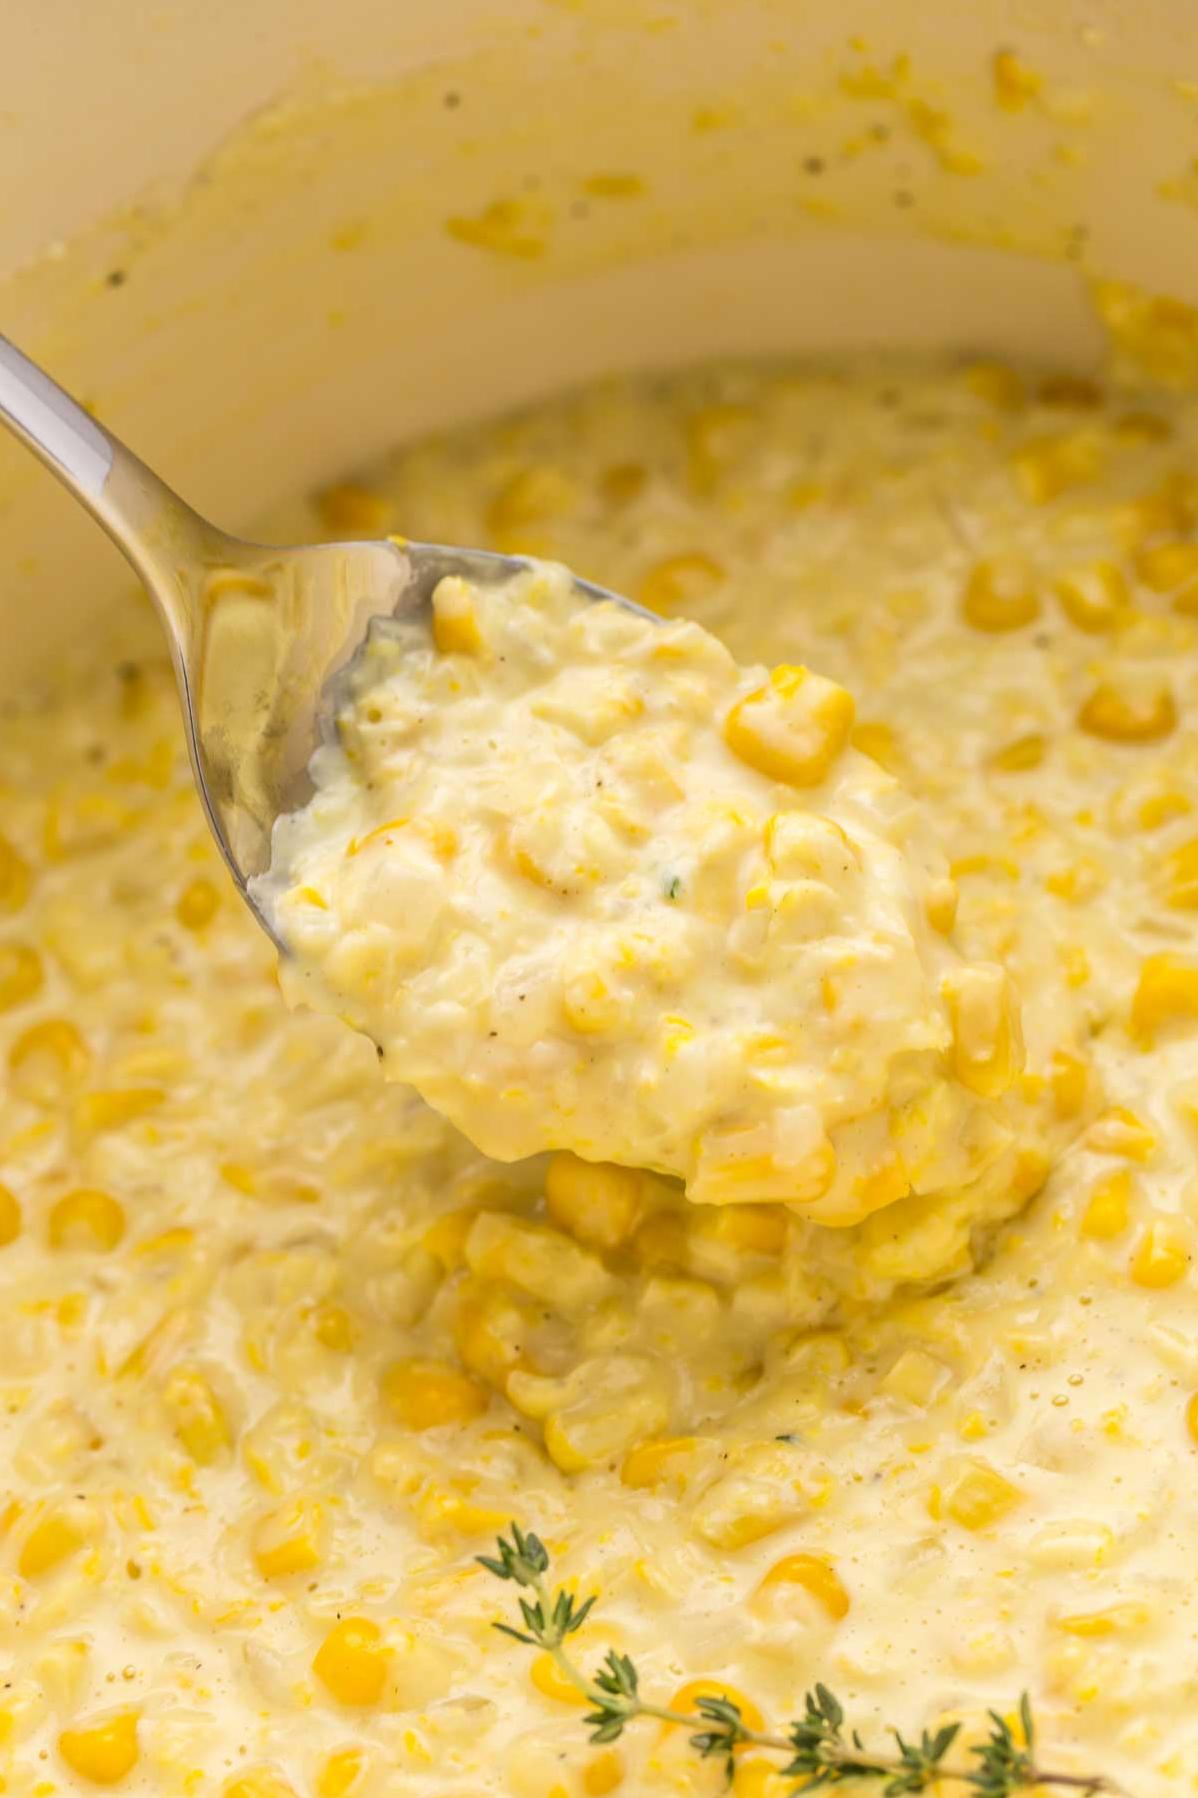  The aroma of butter and corn mingling in the air, promising a mouthwatering meal